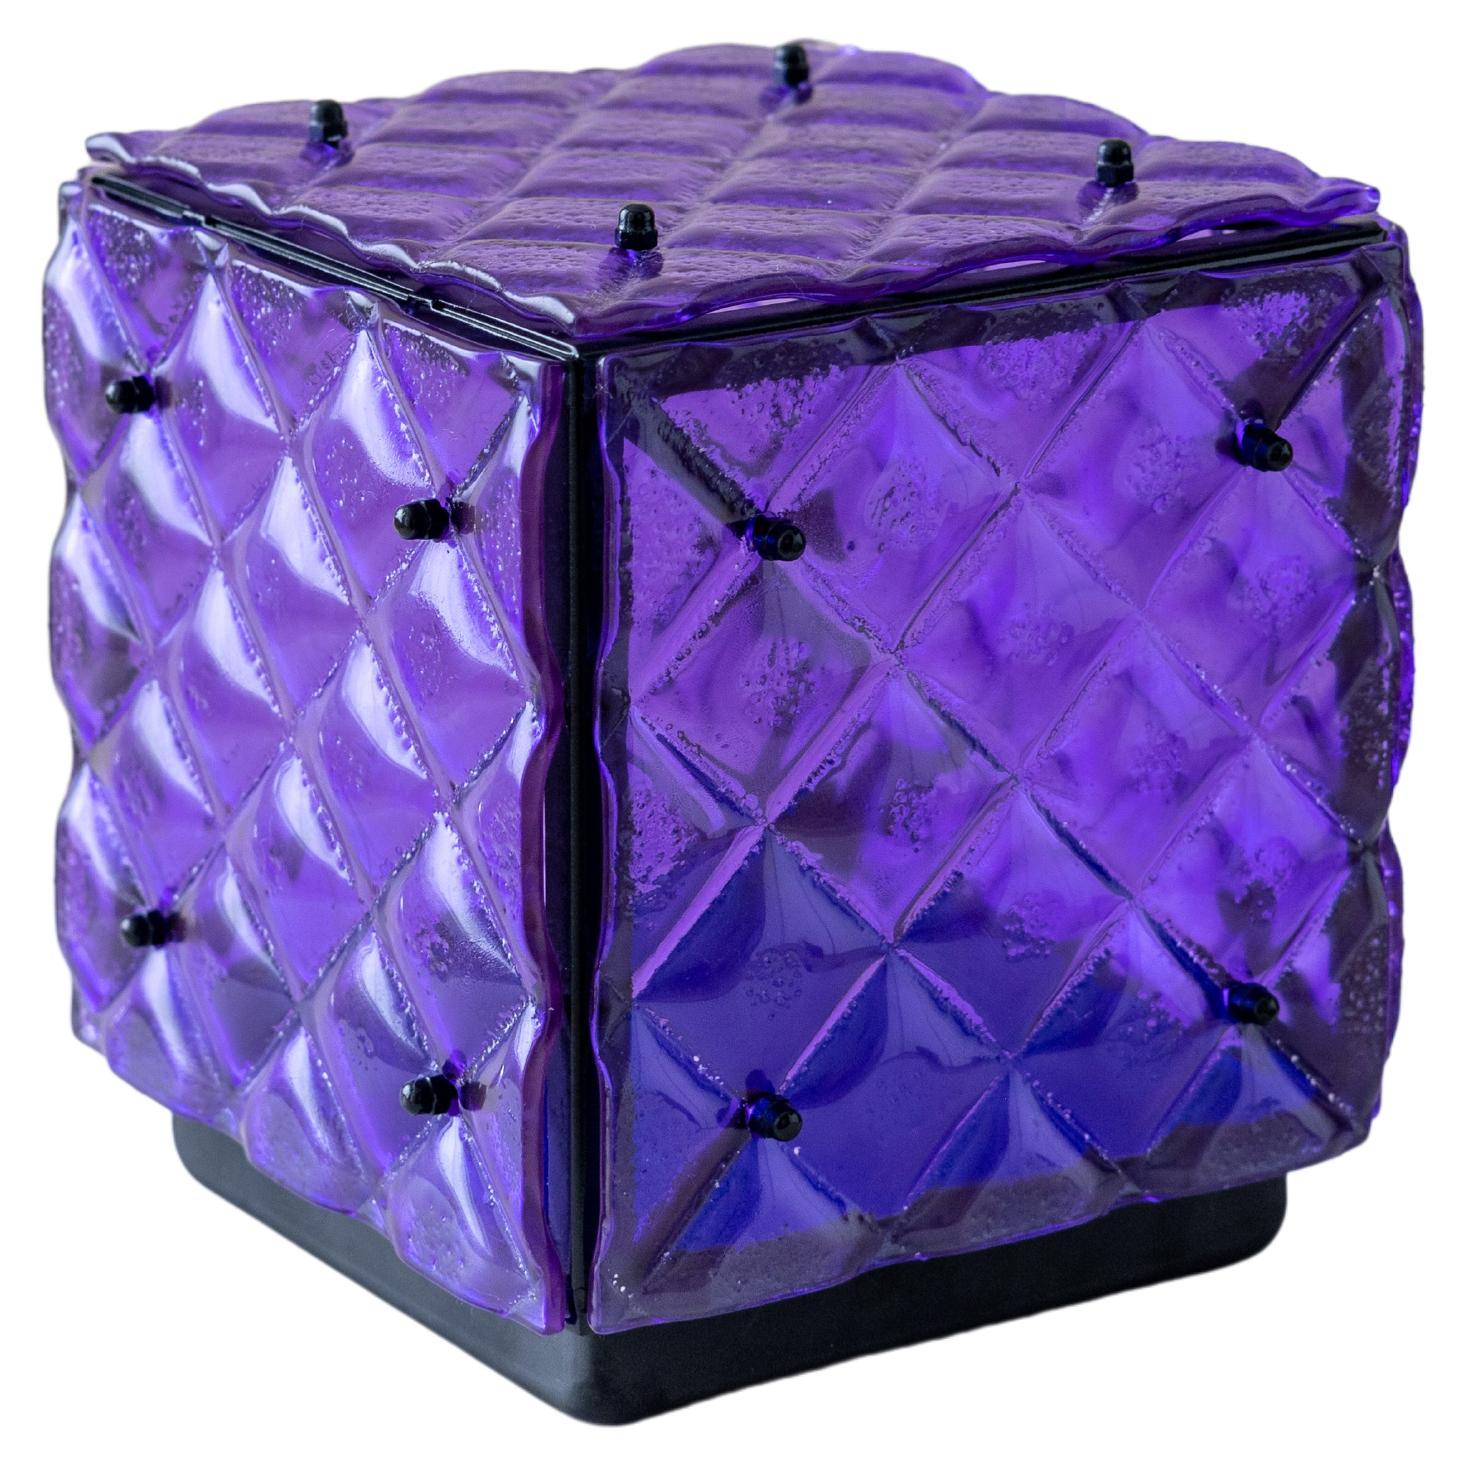 Glass Cube Lamp Purple Ambient Light Artisanal Fused Glass Contemporary Design